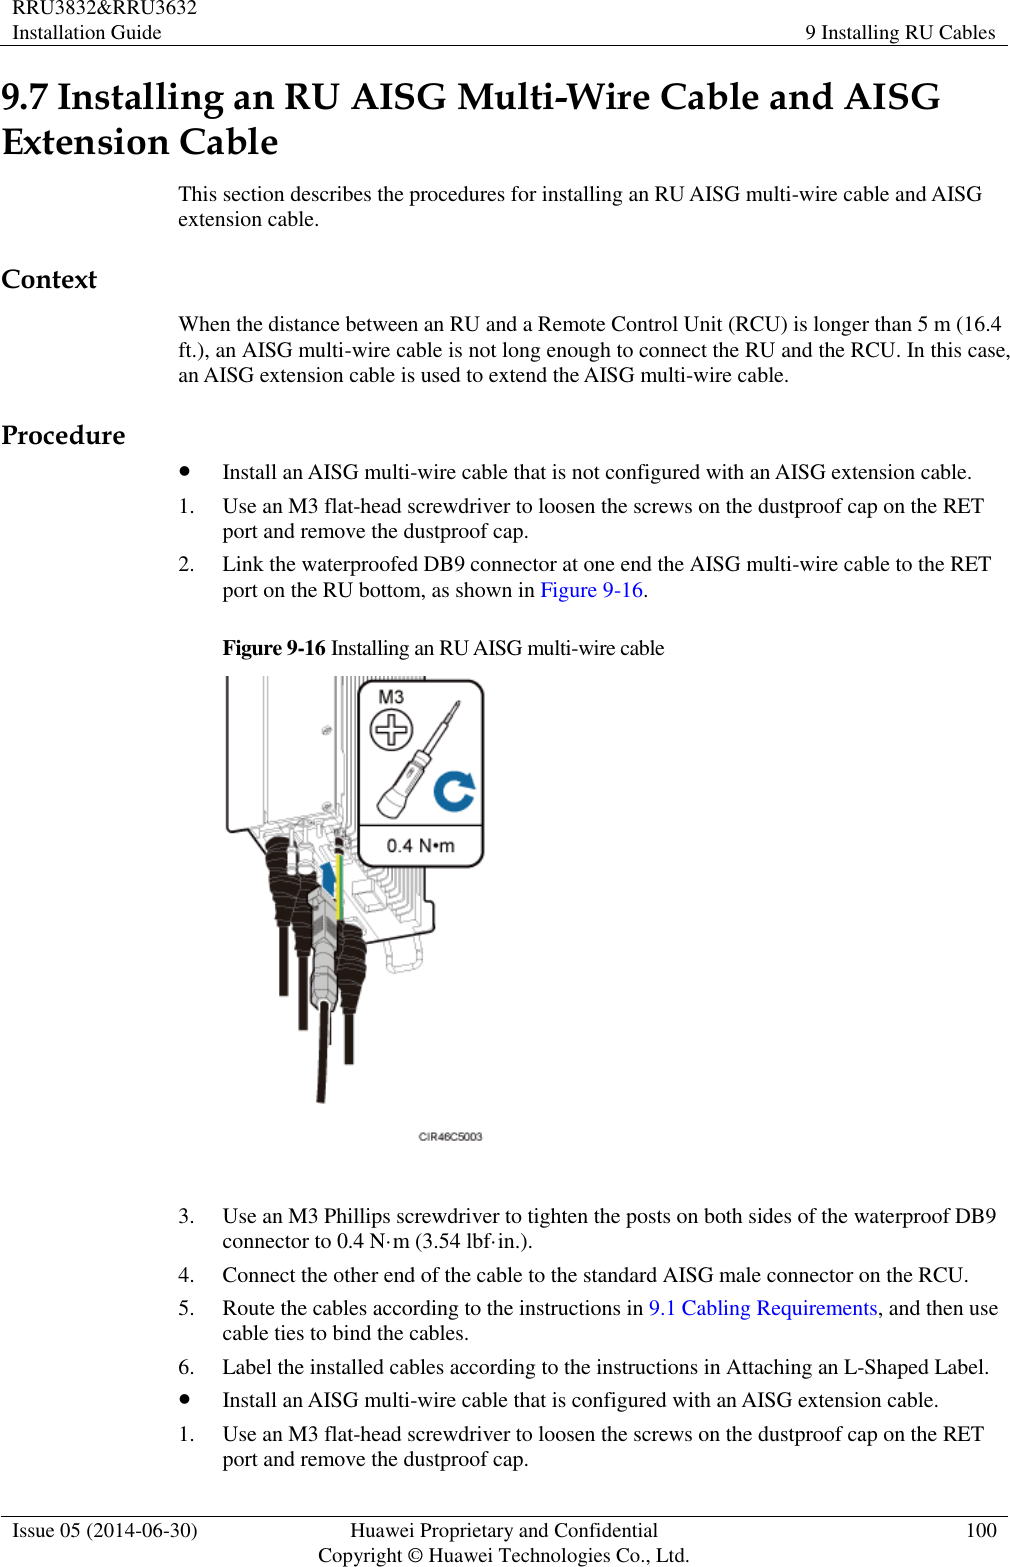 RRU3832&amp;RRU3632 Installation Guide 9 Installing RU Cables  Issue 05 (2014-06-30) Huawei Proprietary and Confidential                                     Copyright © Huawei Technologies Co., Ltd. 100  9.7 Installing an RU AISG Multi-Wire Cable and AISG Extension Cable This section describes the procedures for installing an RU AISG multi-wire cable and AISG extension cable. Context When the distance between an RU and a Remote Control Unit (RCU) is longer than 5 m (16.4 ft.), an AISG multi-wire cable is not long enough to connect the RU and the RCU. In this case, an AISG extension cable is used to extend the AISG multi-wire cable. Procedure  Install an AISG multi-wire cable that is not configured with an AISG extension cable. 1. Use an M3 flat-head screwdriver to loosen the screws on the dustproof cap on the RET port and remove the dustproof cap. 2. Link the waterproofed DB9 connector at one end the AISG multi-wire cable to the RET port on the RU bottom, as shown in Figure 9-16.   Figure 9-16 Installing an RU AISG multi-wire cable   3. Use an M3 Phillips screwdriver to tighten the posts on both sides of the waterproof DB9 connector to 0.4 N·m (3.54 lbf·in.). 4. Connect the other end of the cable to the standard AISG male connector on the RCU. 5. Route the cables according to the instructions in 9.1 Cabling Requirements, and then use cable ties to bind the cables. 6. Label the installed cables according to the instructions in Attaching an L-Shaped Label.  Install an AISG multi-wire cable that is configured with an AISG extension cable.   1. Use an M3 flat-head screwdriver to loosen the screws on the dustproof cap on the RET port and remove the dustproof cap. 